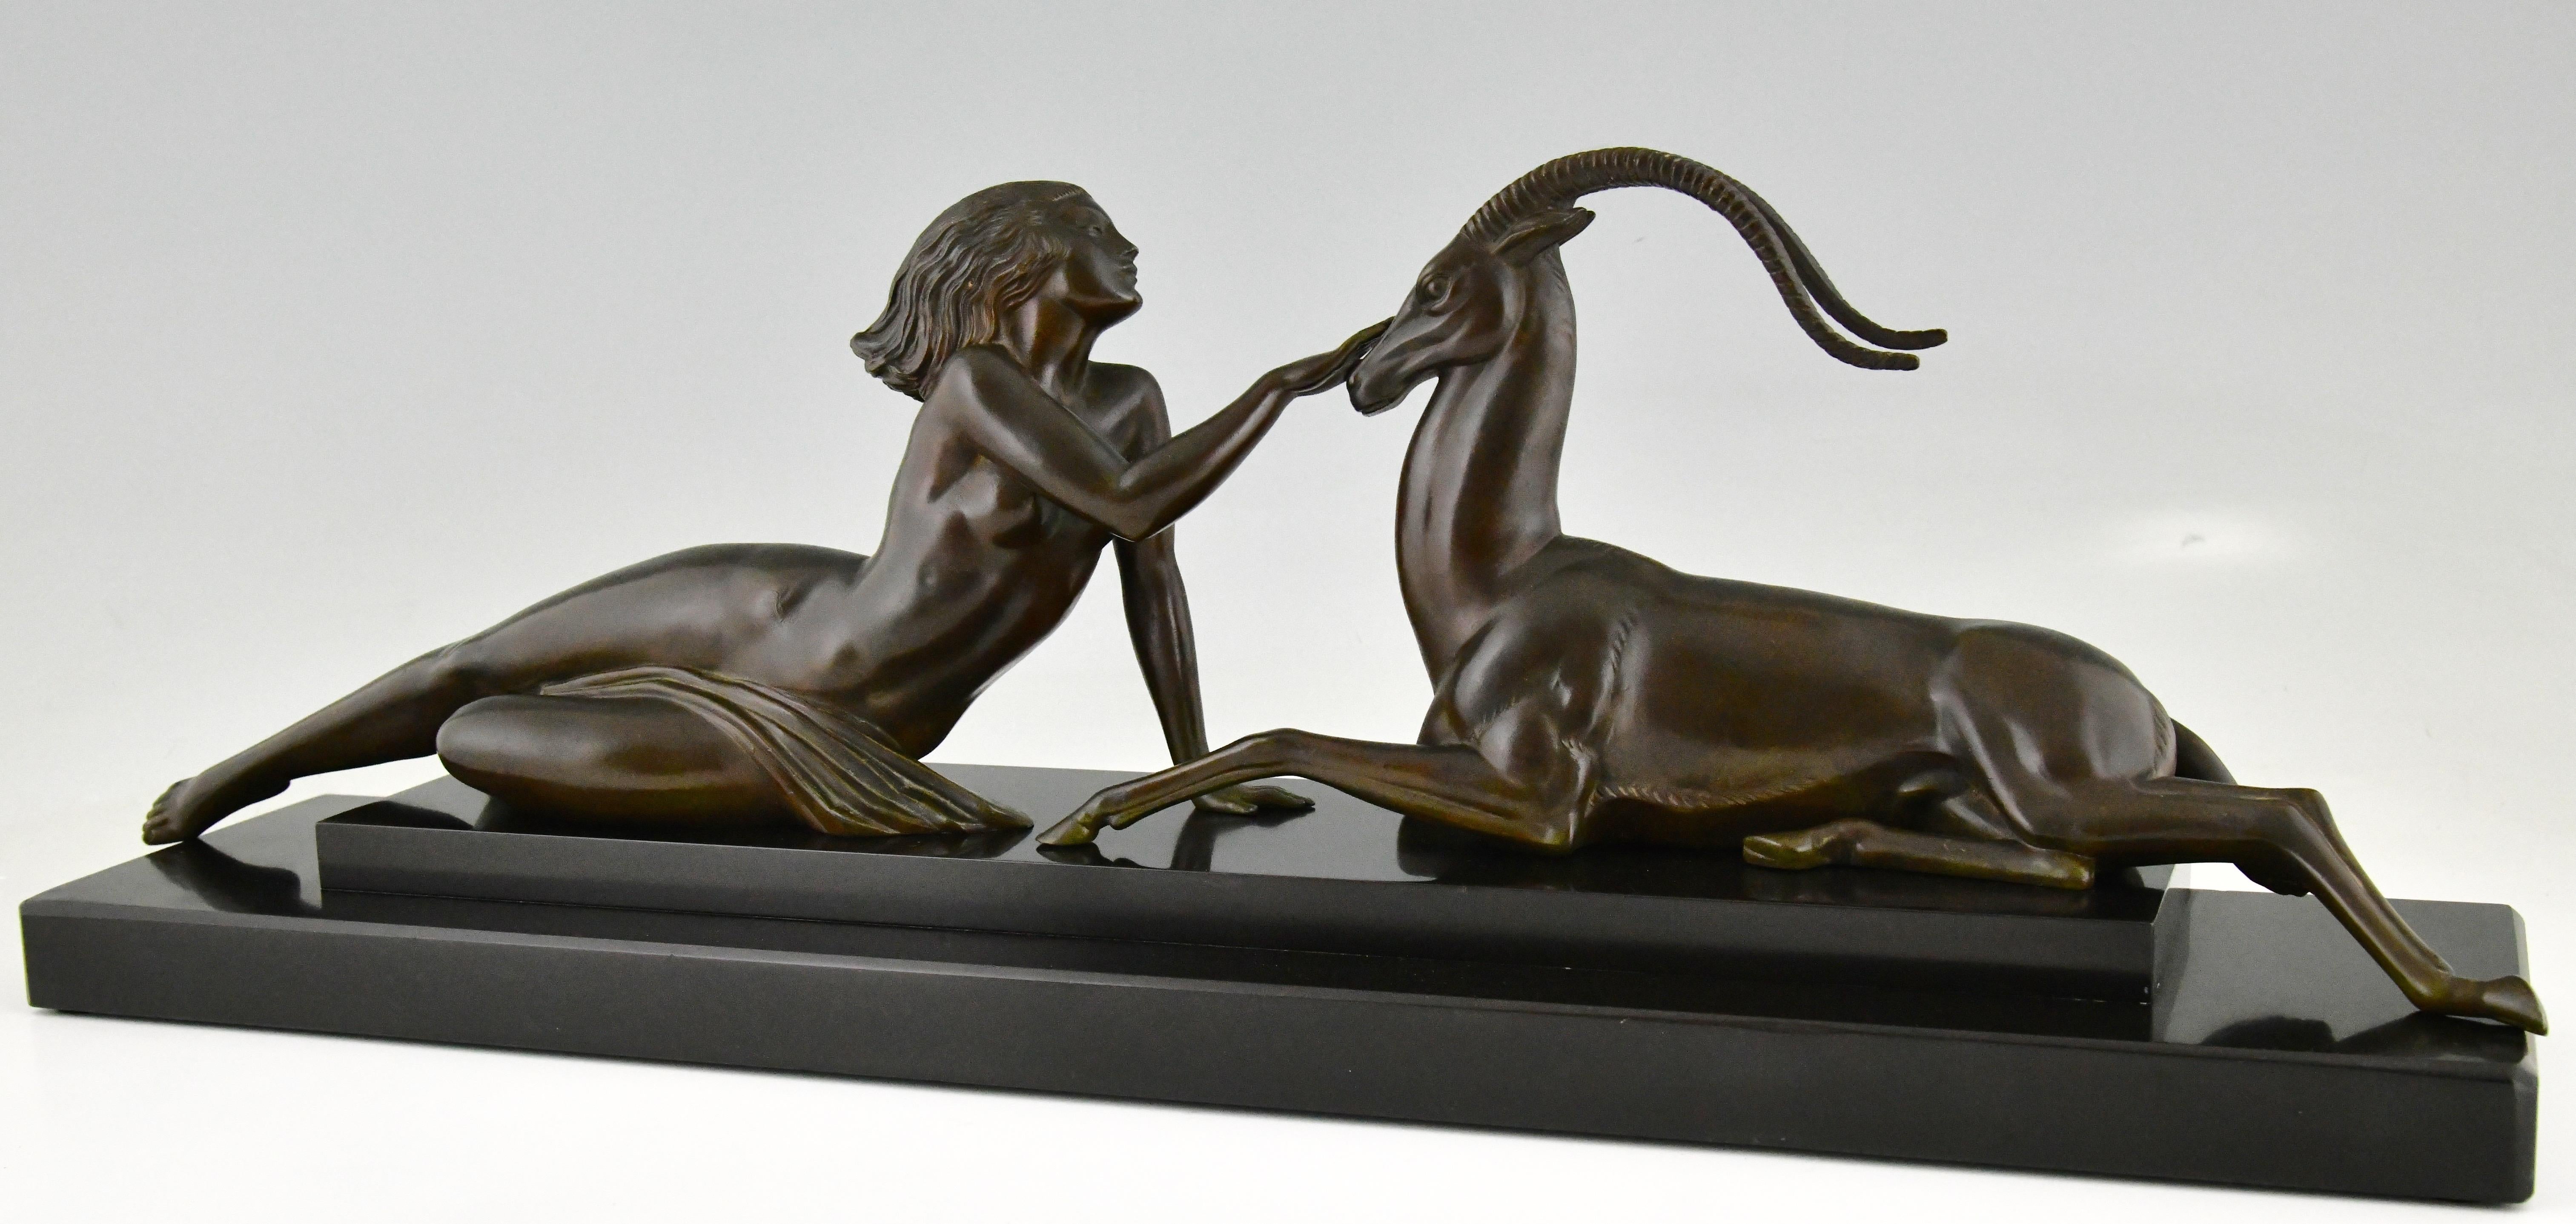 Seduction, elegant Art Deco sculpture of a nude lady with gazelle by Pierre Le Faguays for Max Le Verrier, signed Fayal. Art metal with dark green patina on a Belgian Black marble base. France 1930

This model is illustrated in several books: Art